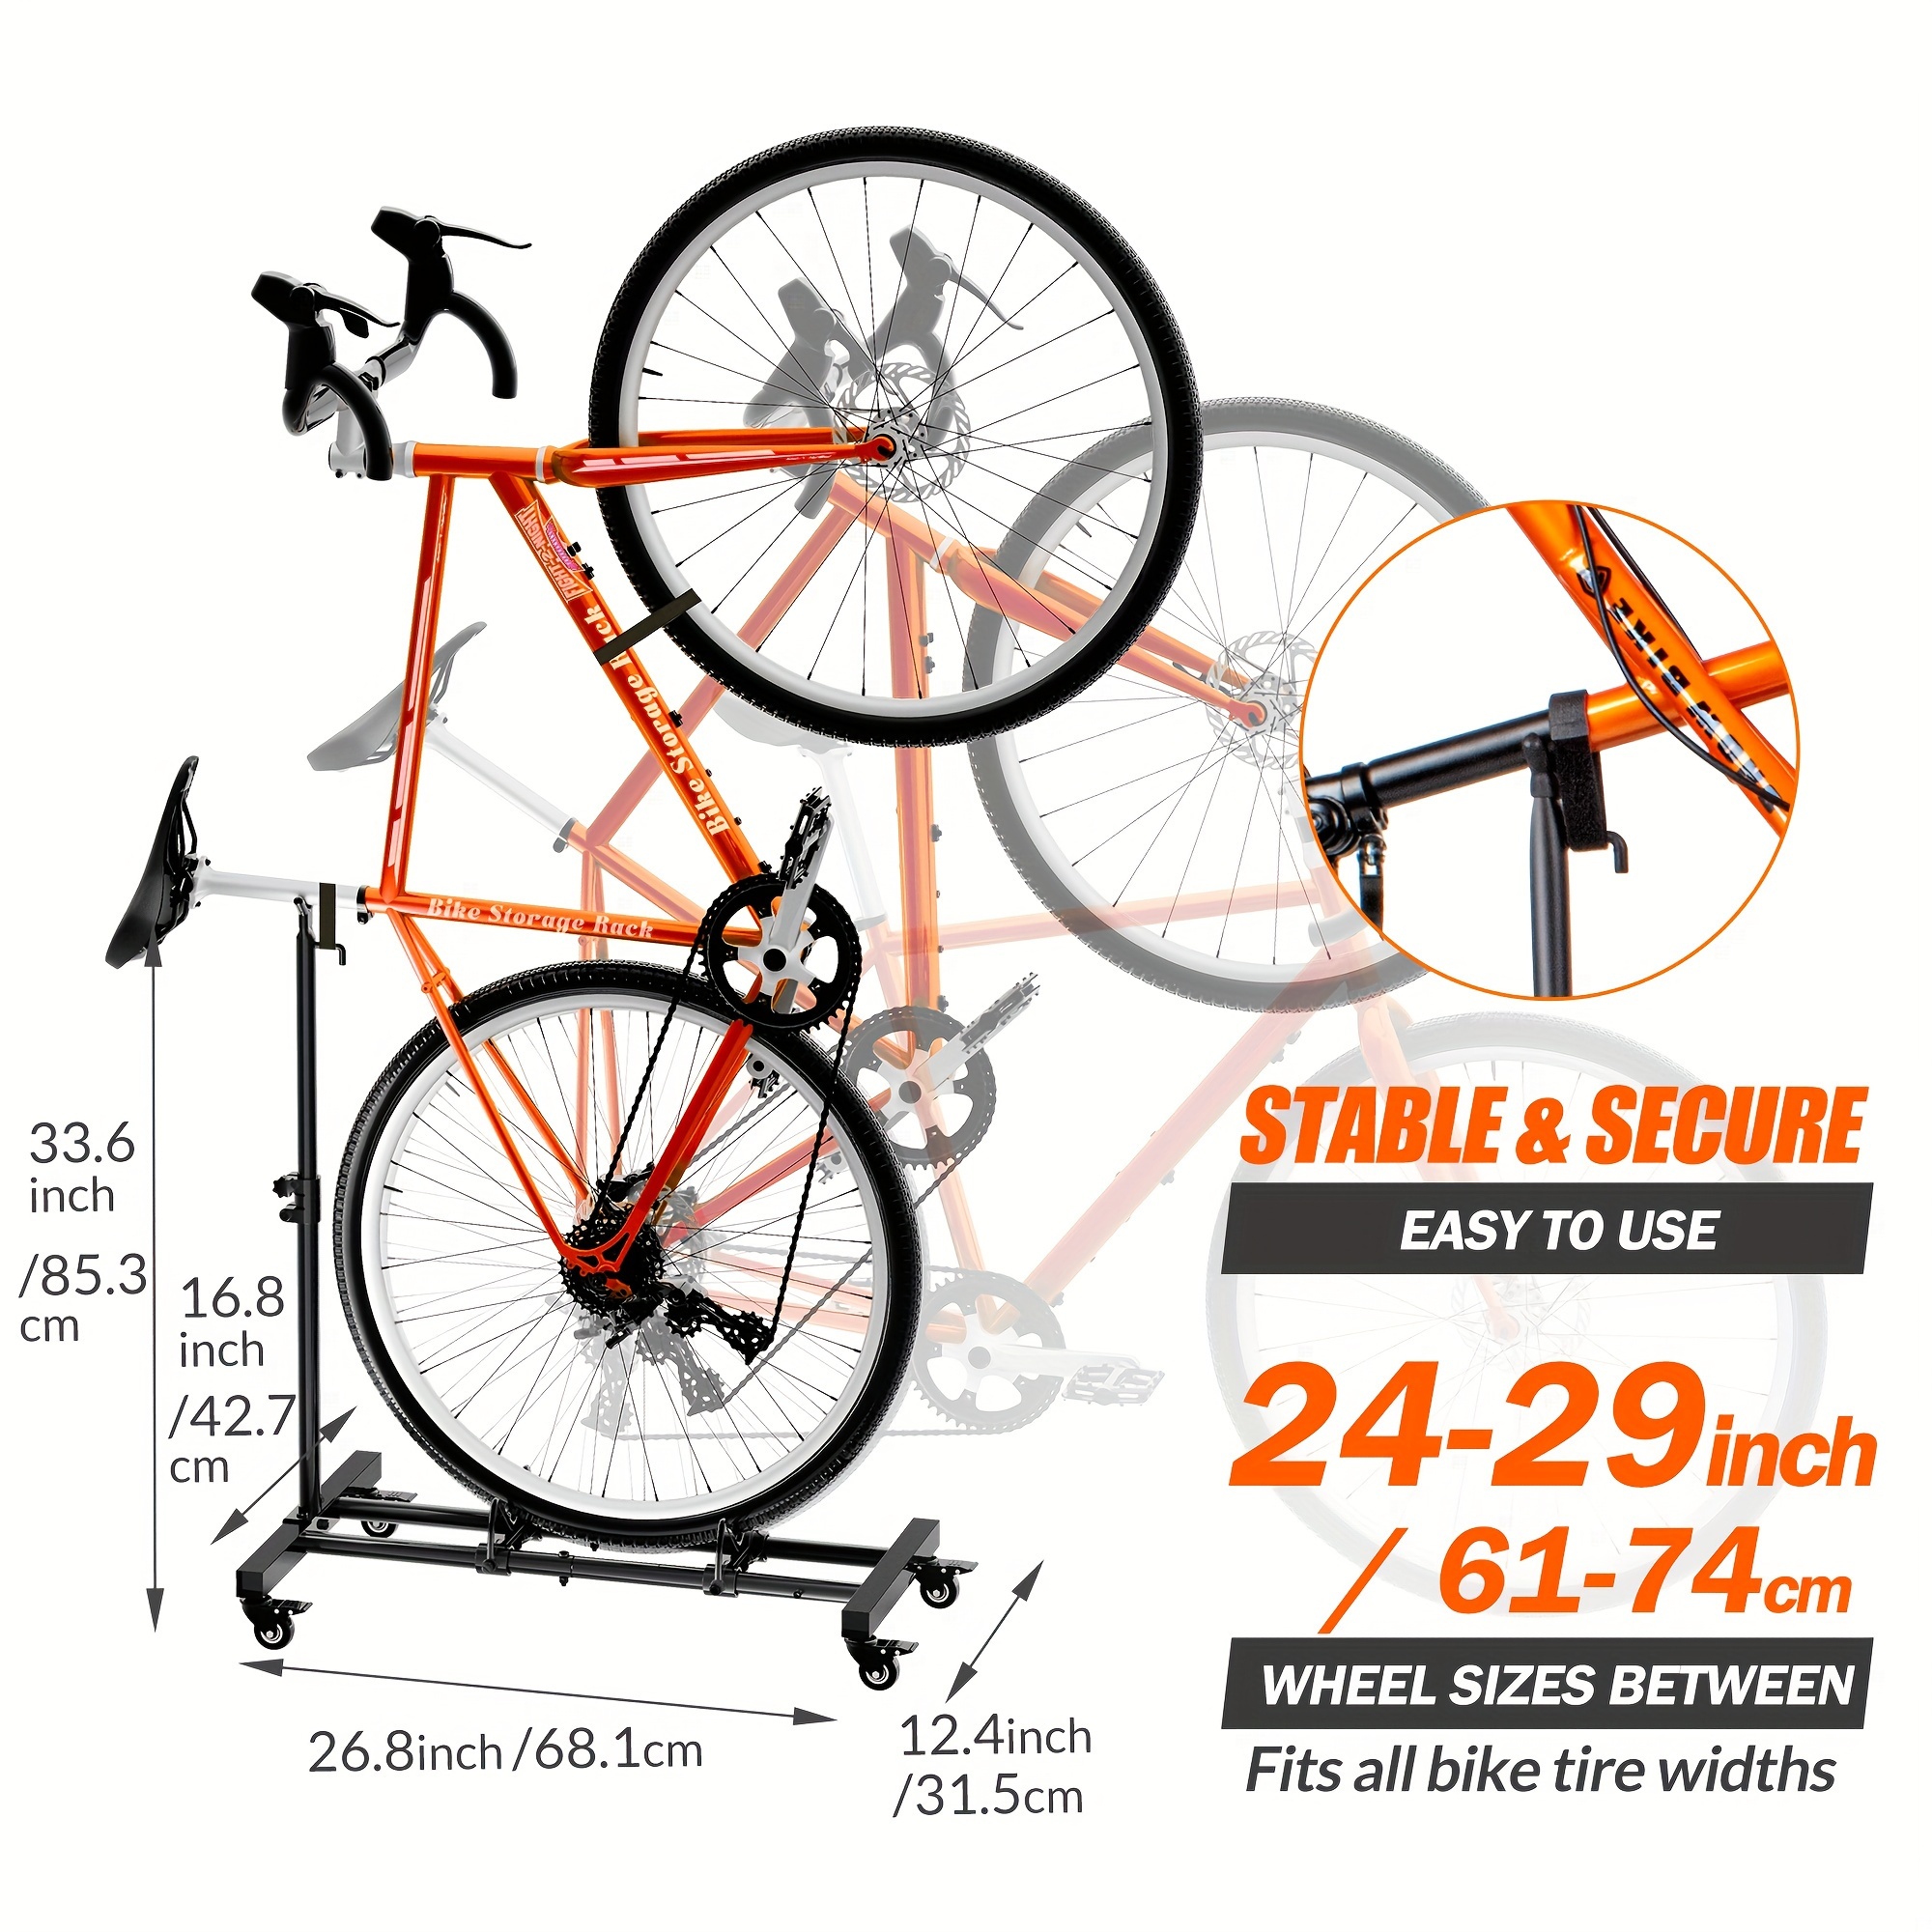 1pc Vertical-bike Stand, Freestanding Indoor Bike Storage Rack, Upright  Bicycle Floor Stand, Indoor Bike Holder With Adjustable Height For Garage &  Apartment - For Wheels Sizes Up To 29”